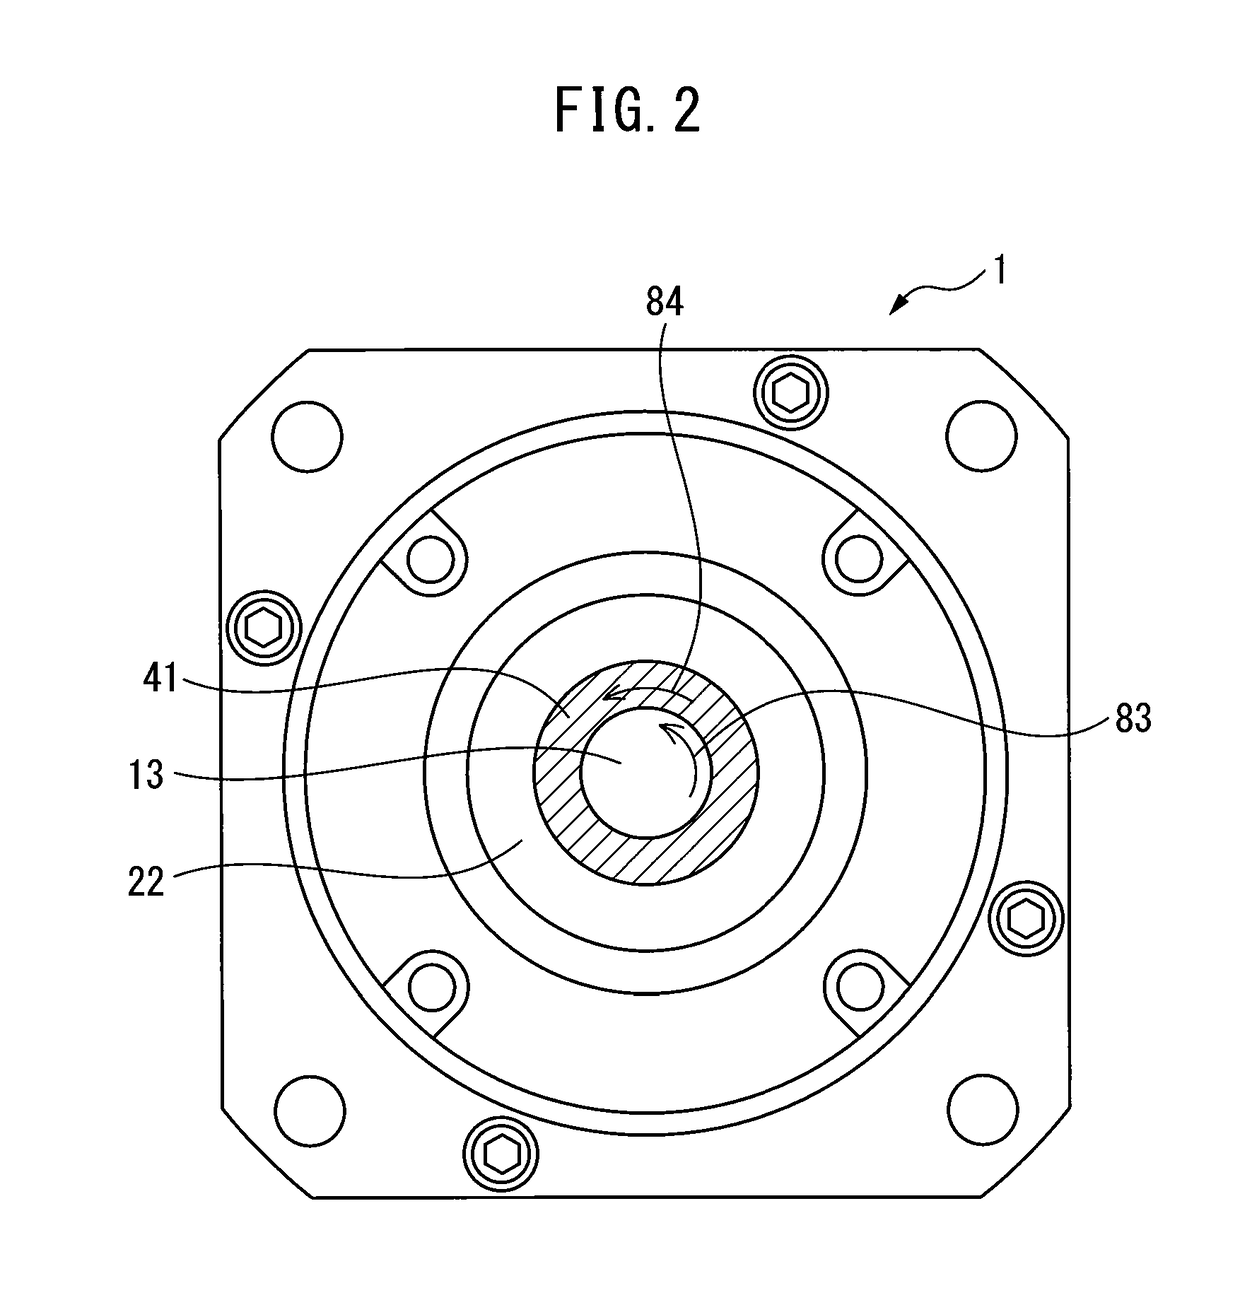 Motor for suppressing entry of foreign matter